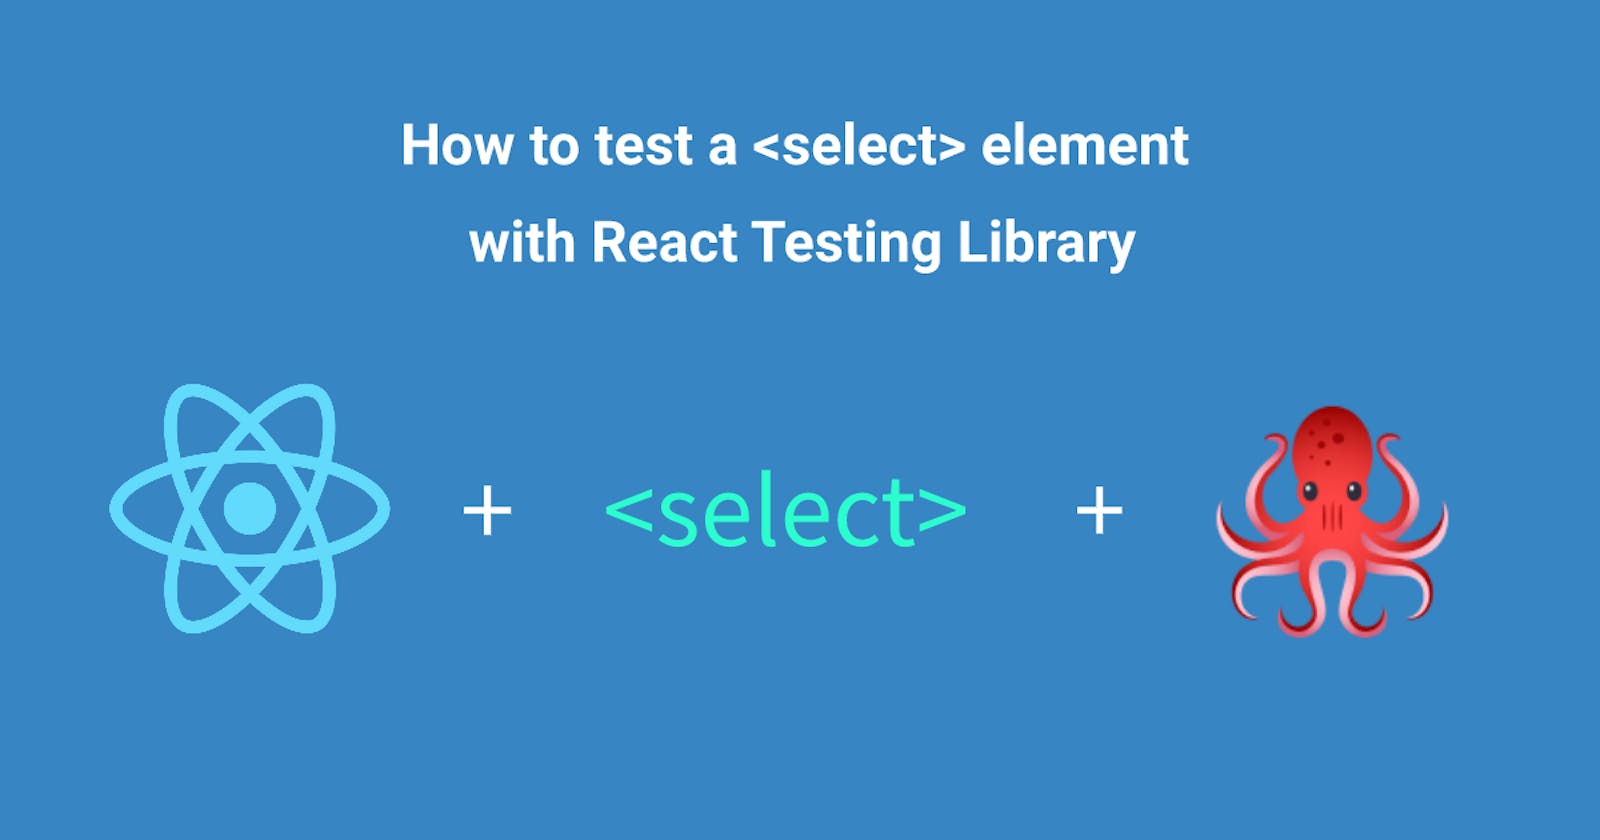 How to test a select element with React Testing Library